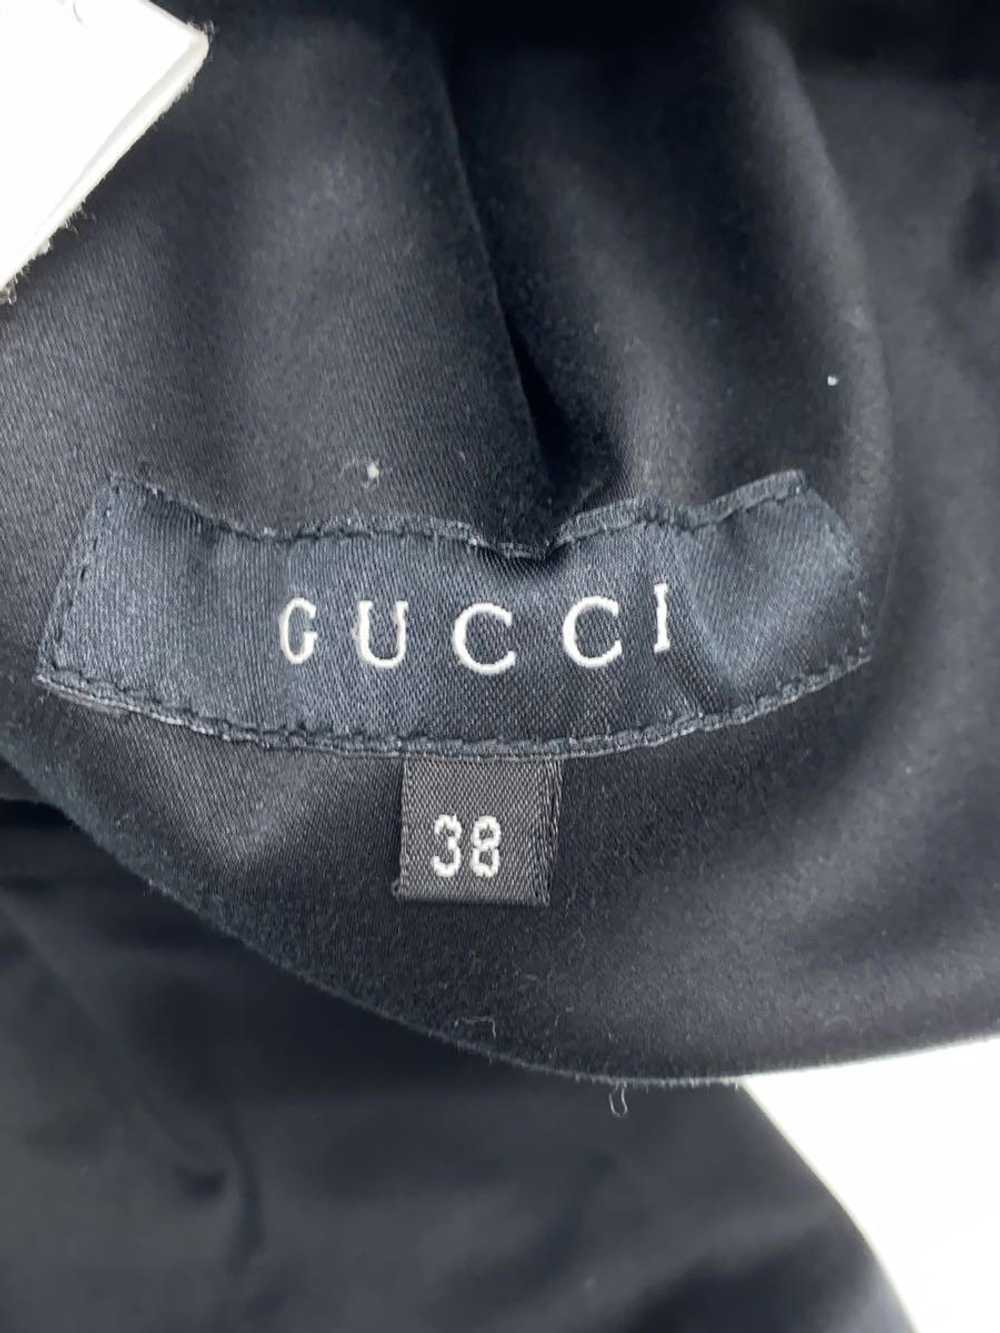 Gucci Belted Studs Jacket Tom Ford Period Stud De… - image 3